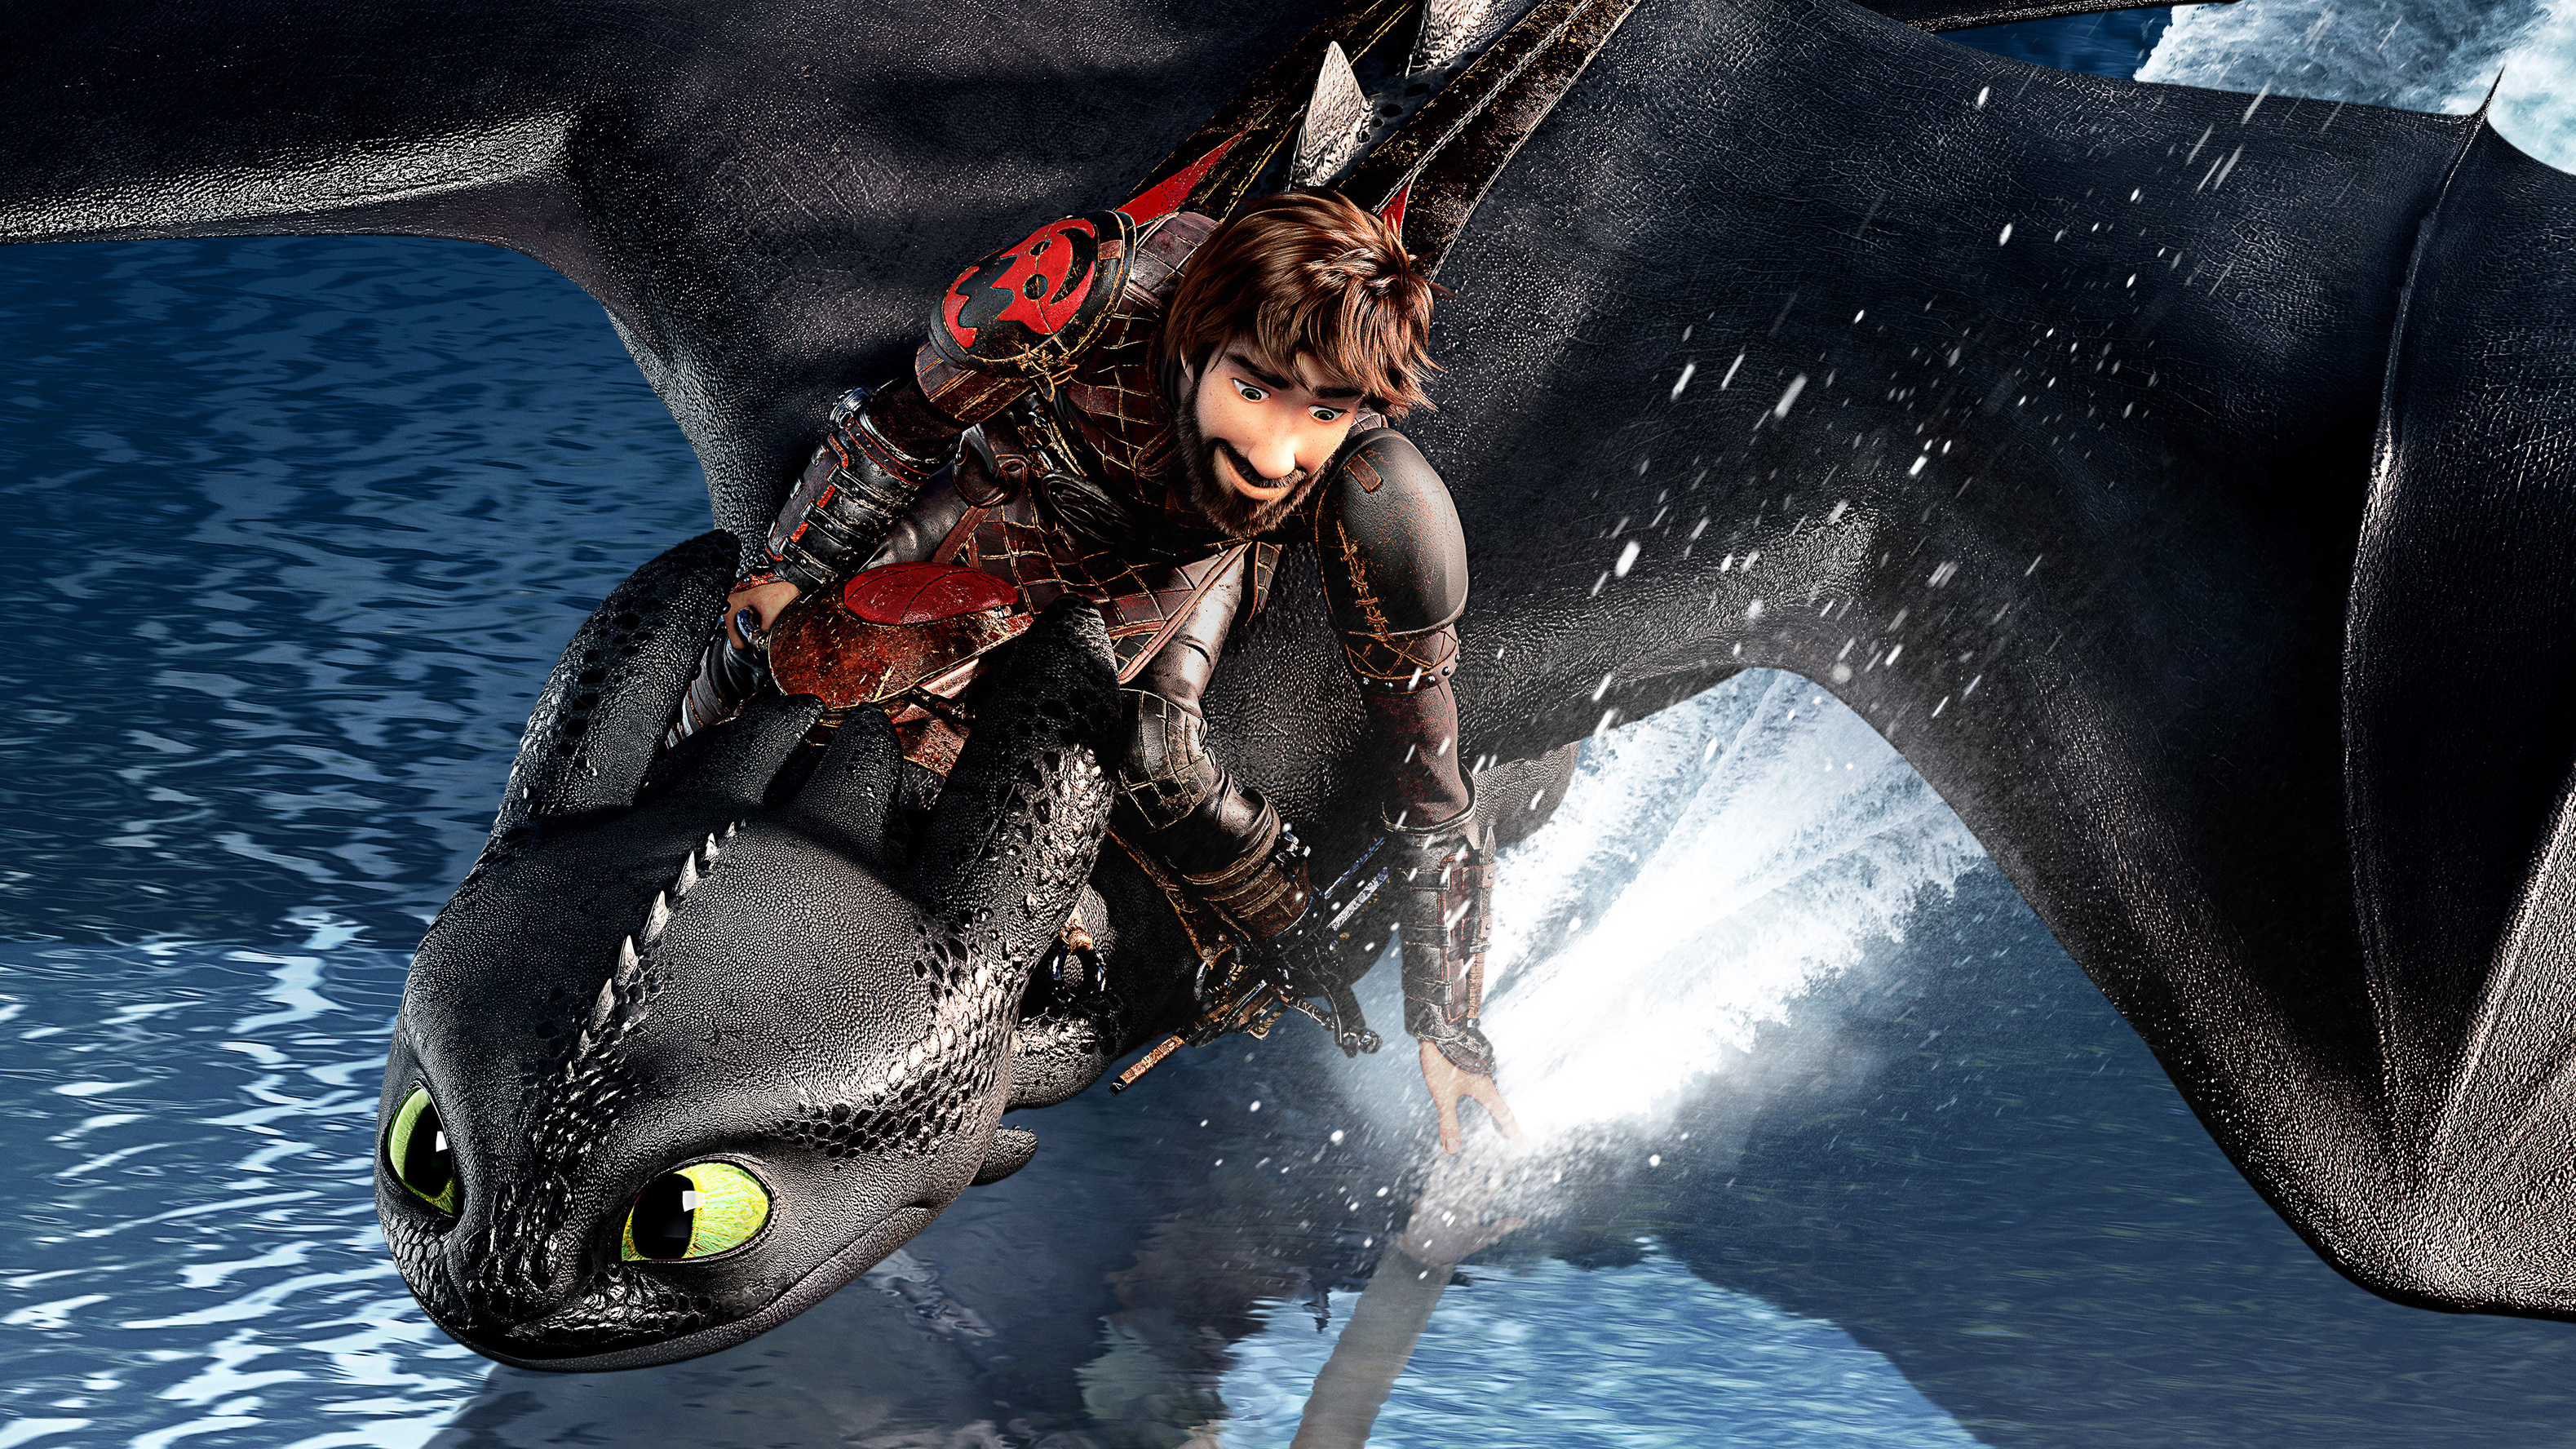 How to Train Your Dragon, Hidden world 2018, HD movies, Wallpapers and images, 3160x1780 HD Desktop